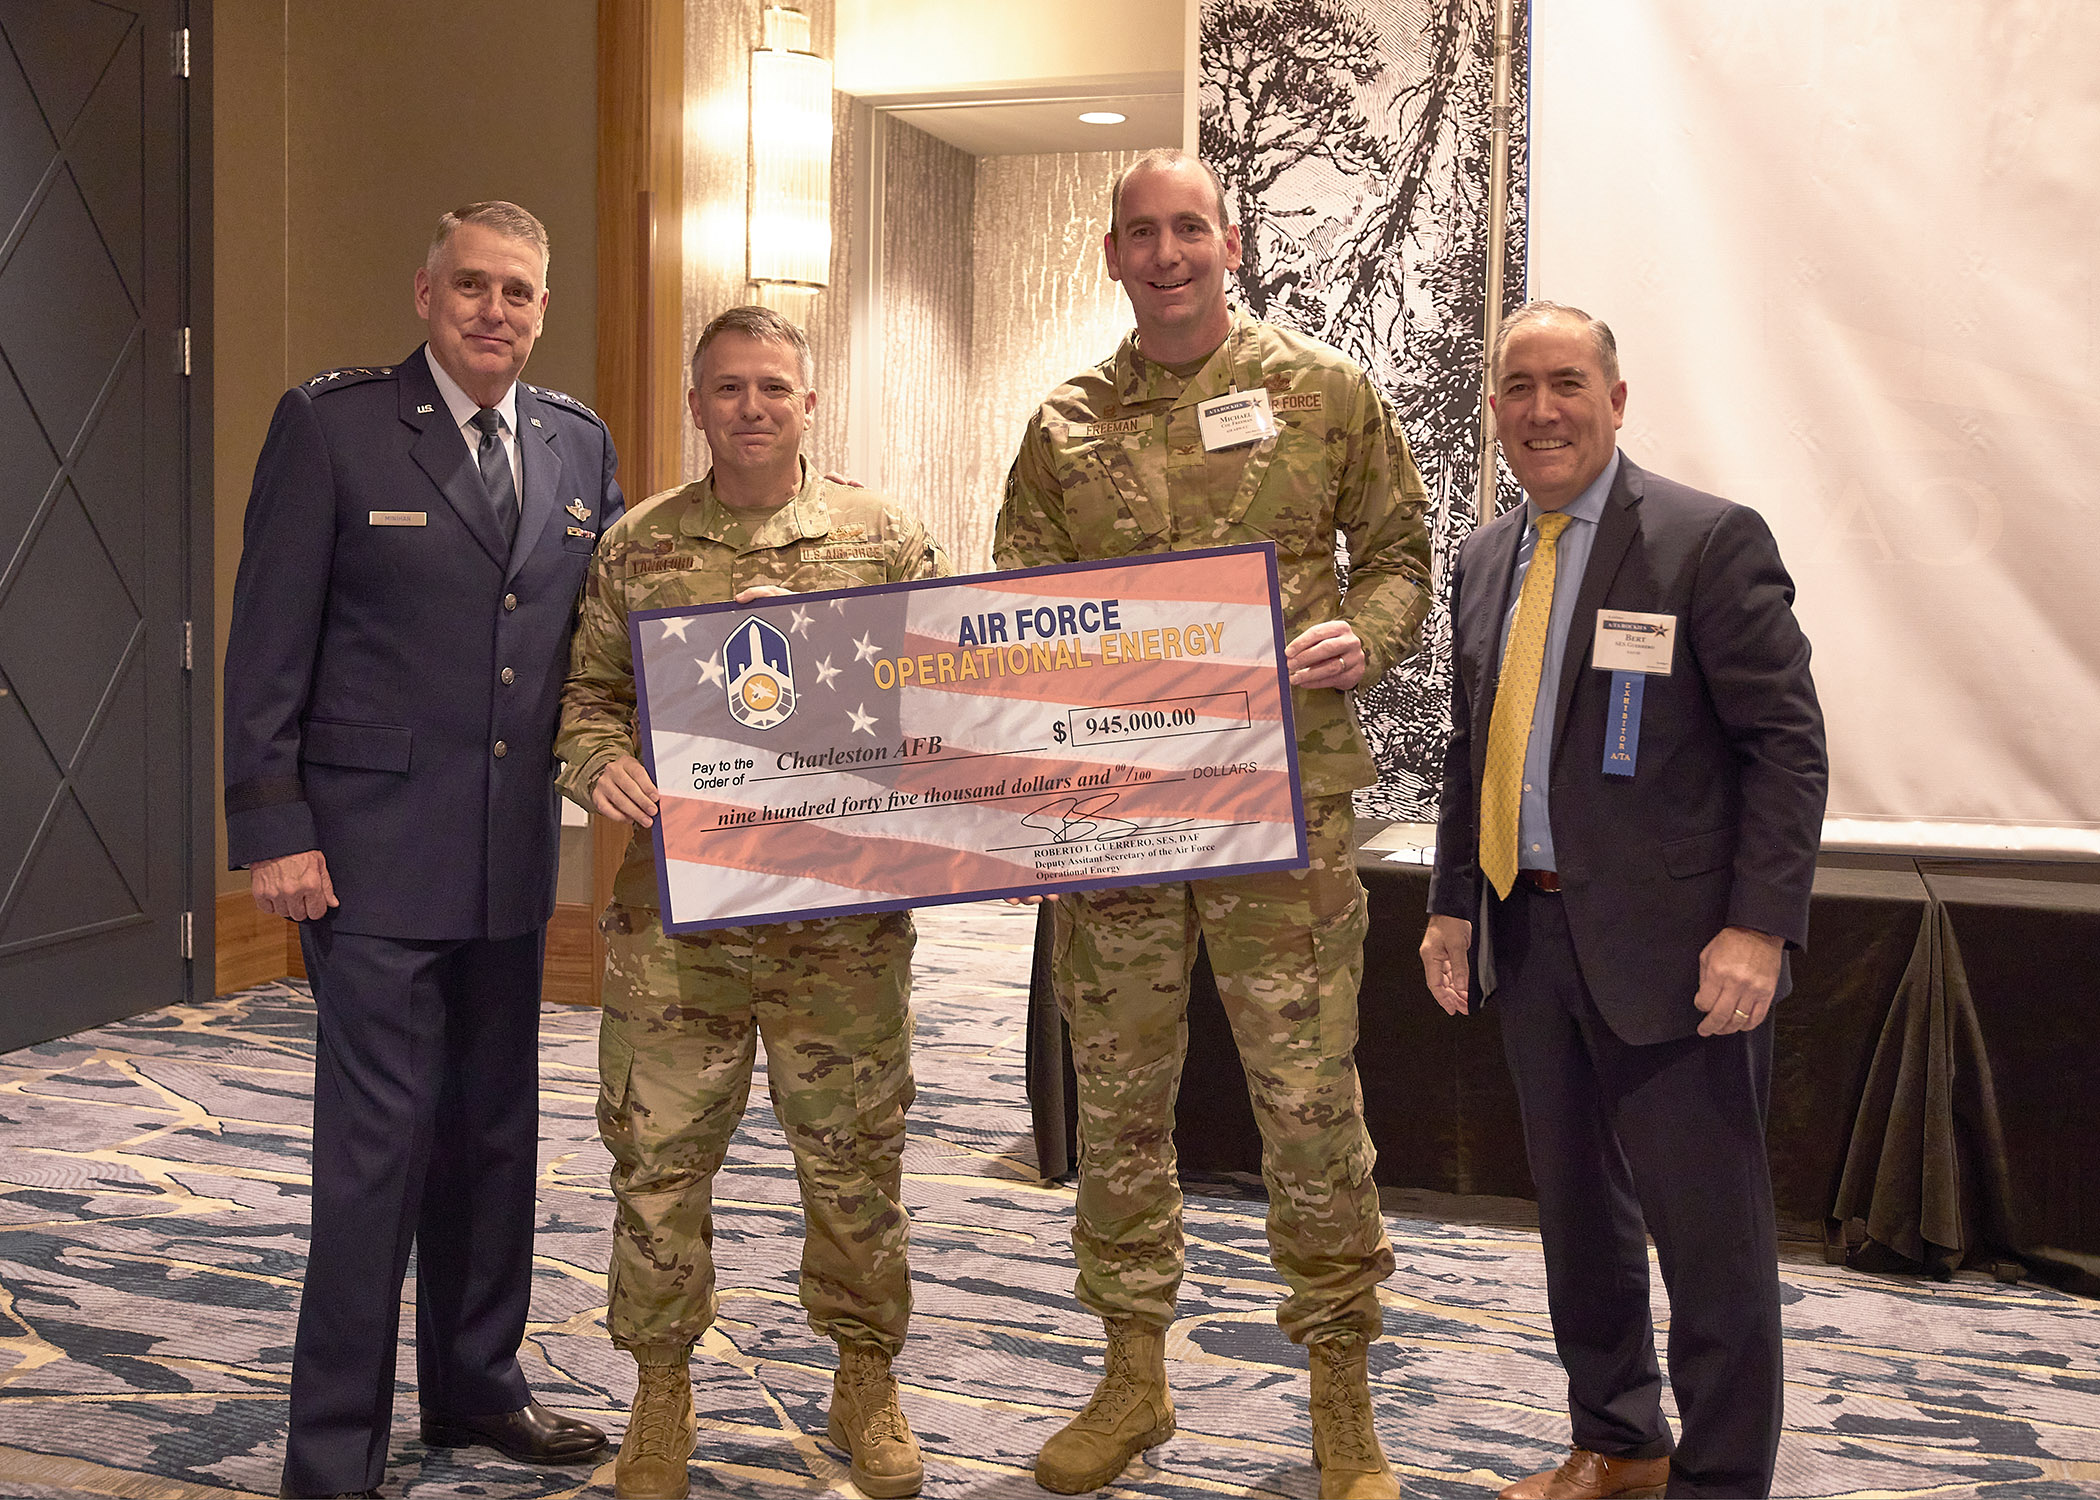 3 Airmen and 1 SES Civilian pose for photo with large check 